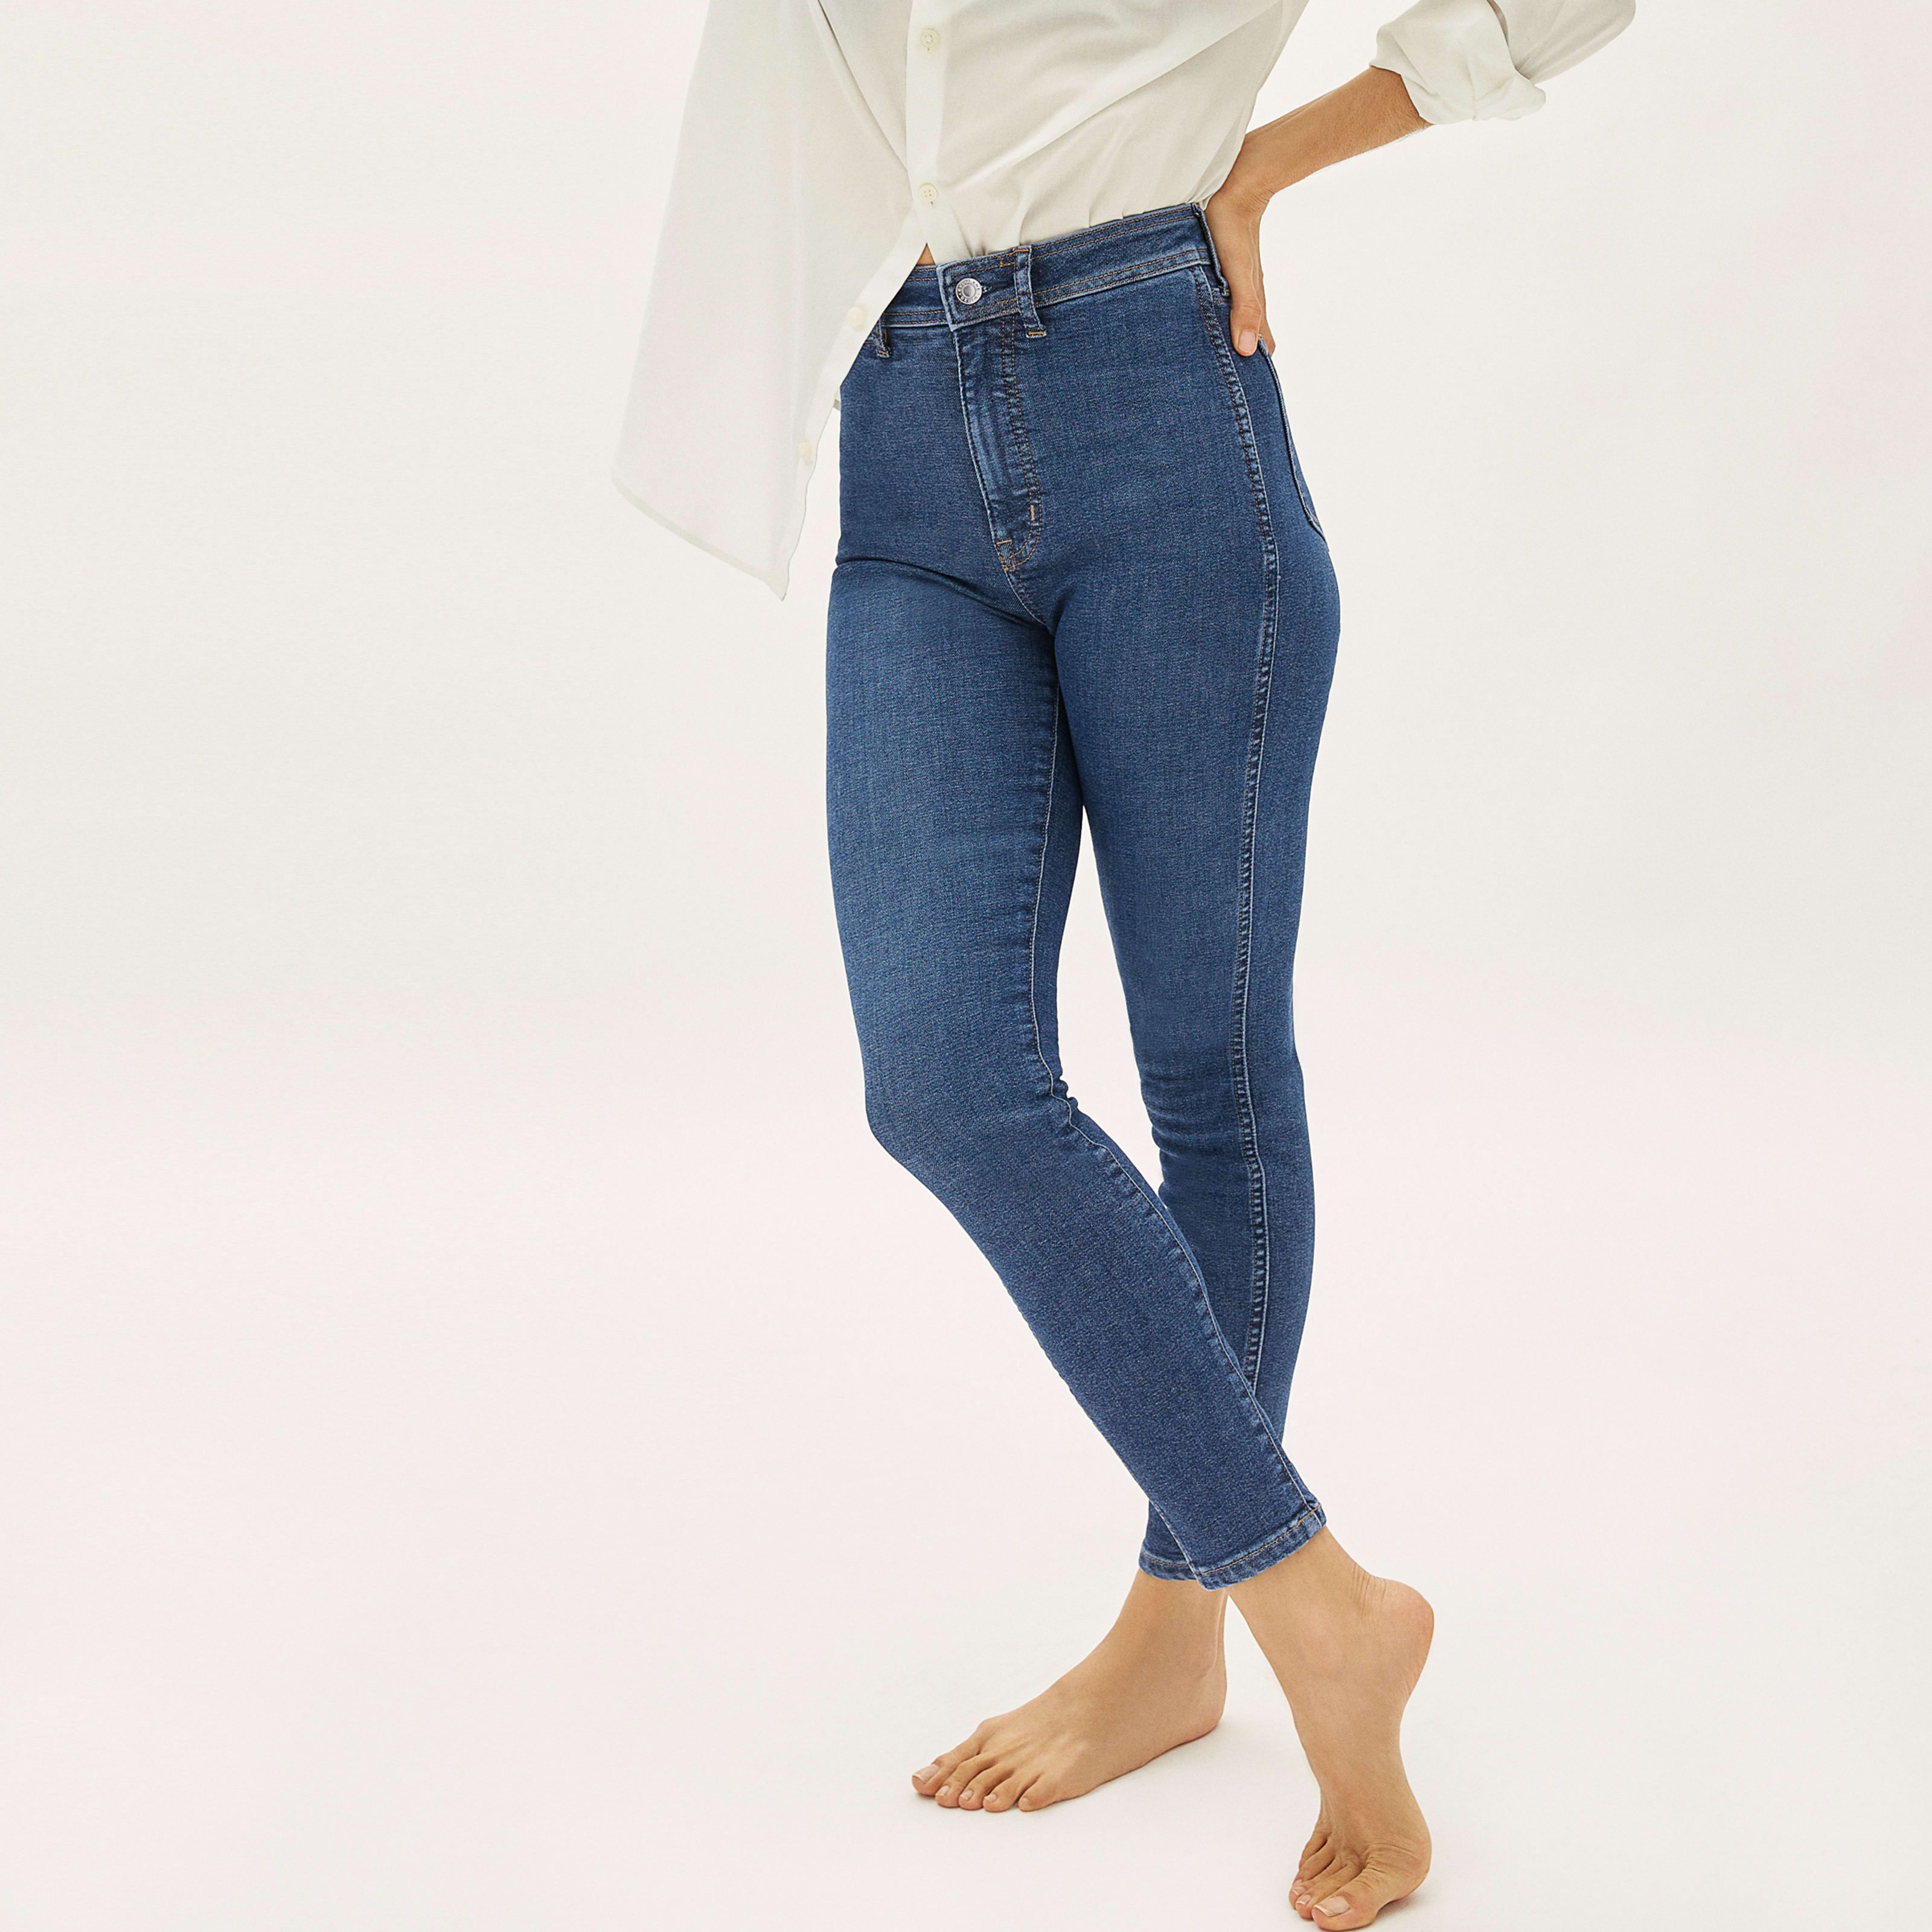 Women's Way-High Skinny Jean by Everlane in Vintage Blue, Size 26 | Everlane